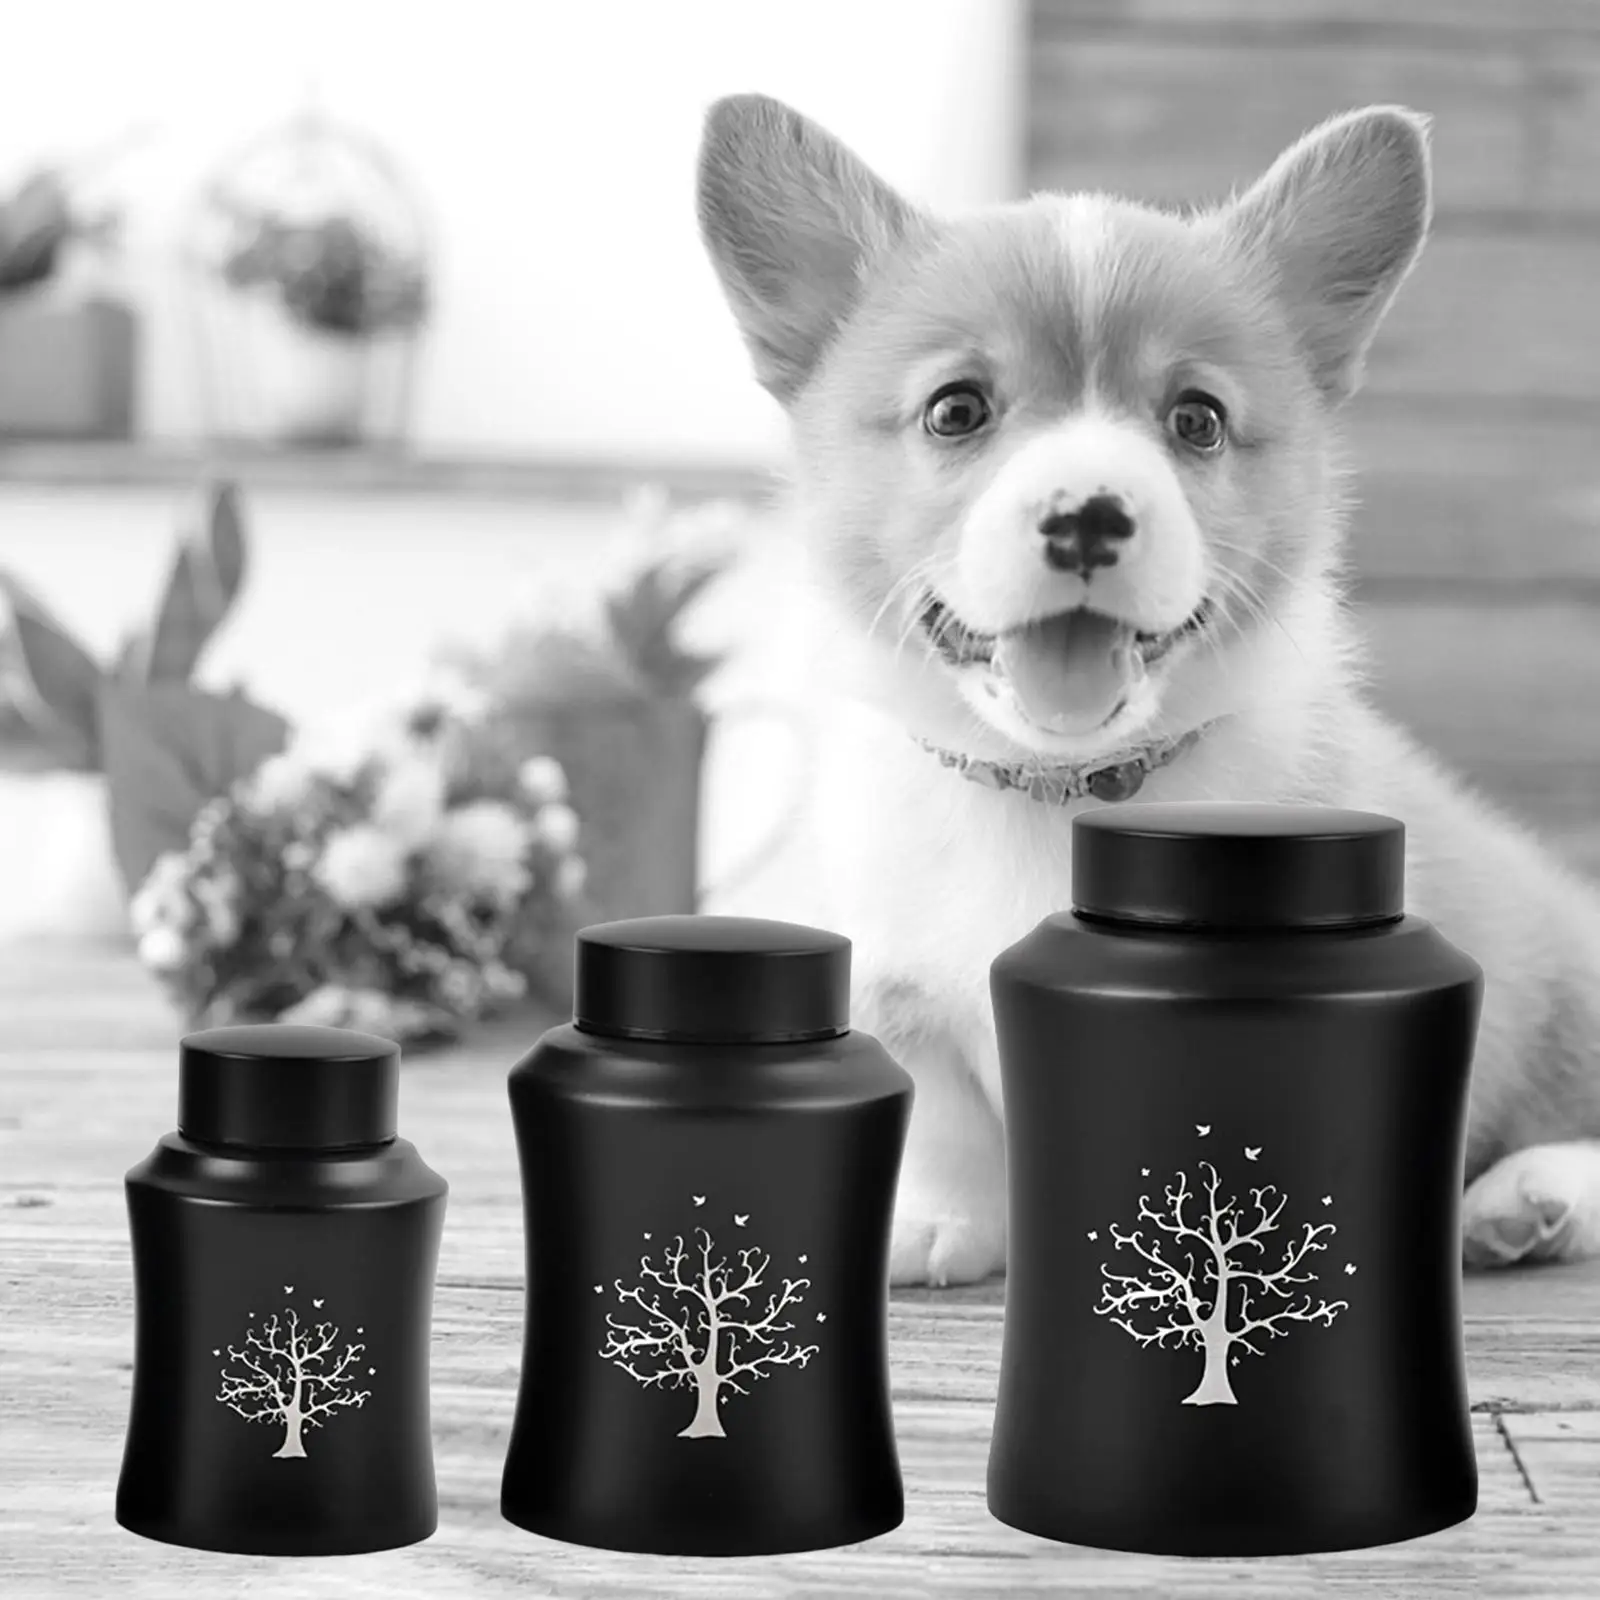 Pet Ash Urn Dog Ash Urns Urn Box Cremation Memorial Urns for Dogs and Cats